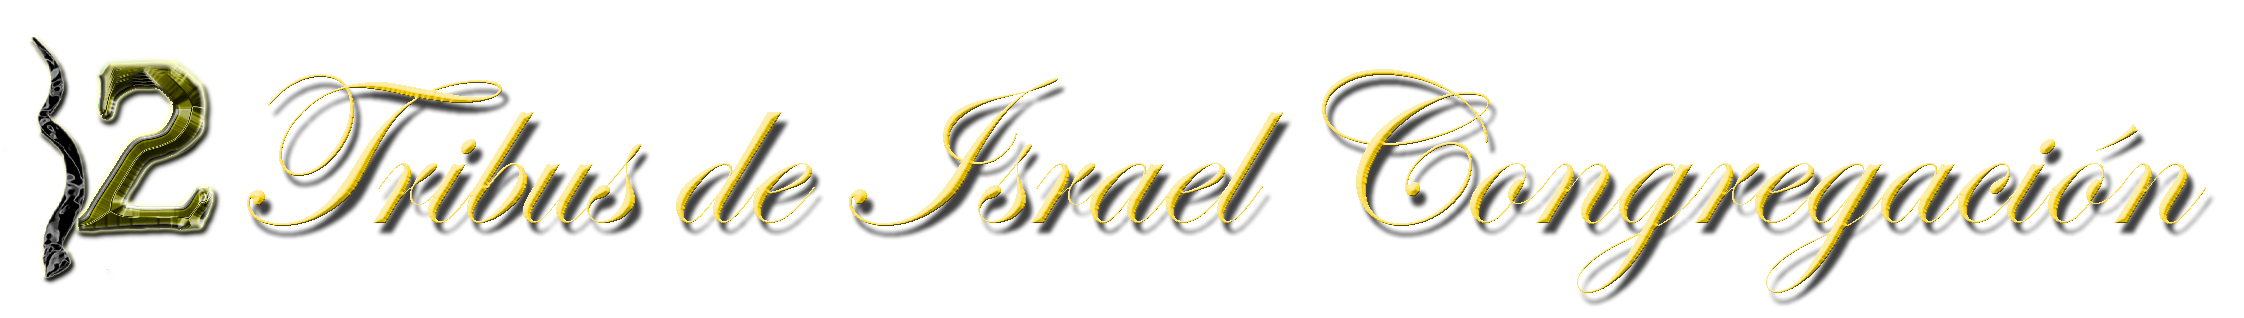 12 Tribes of Israel Congregation